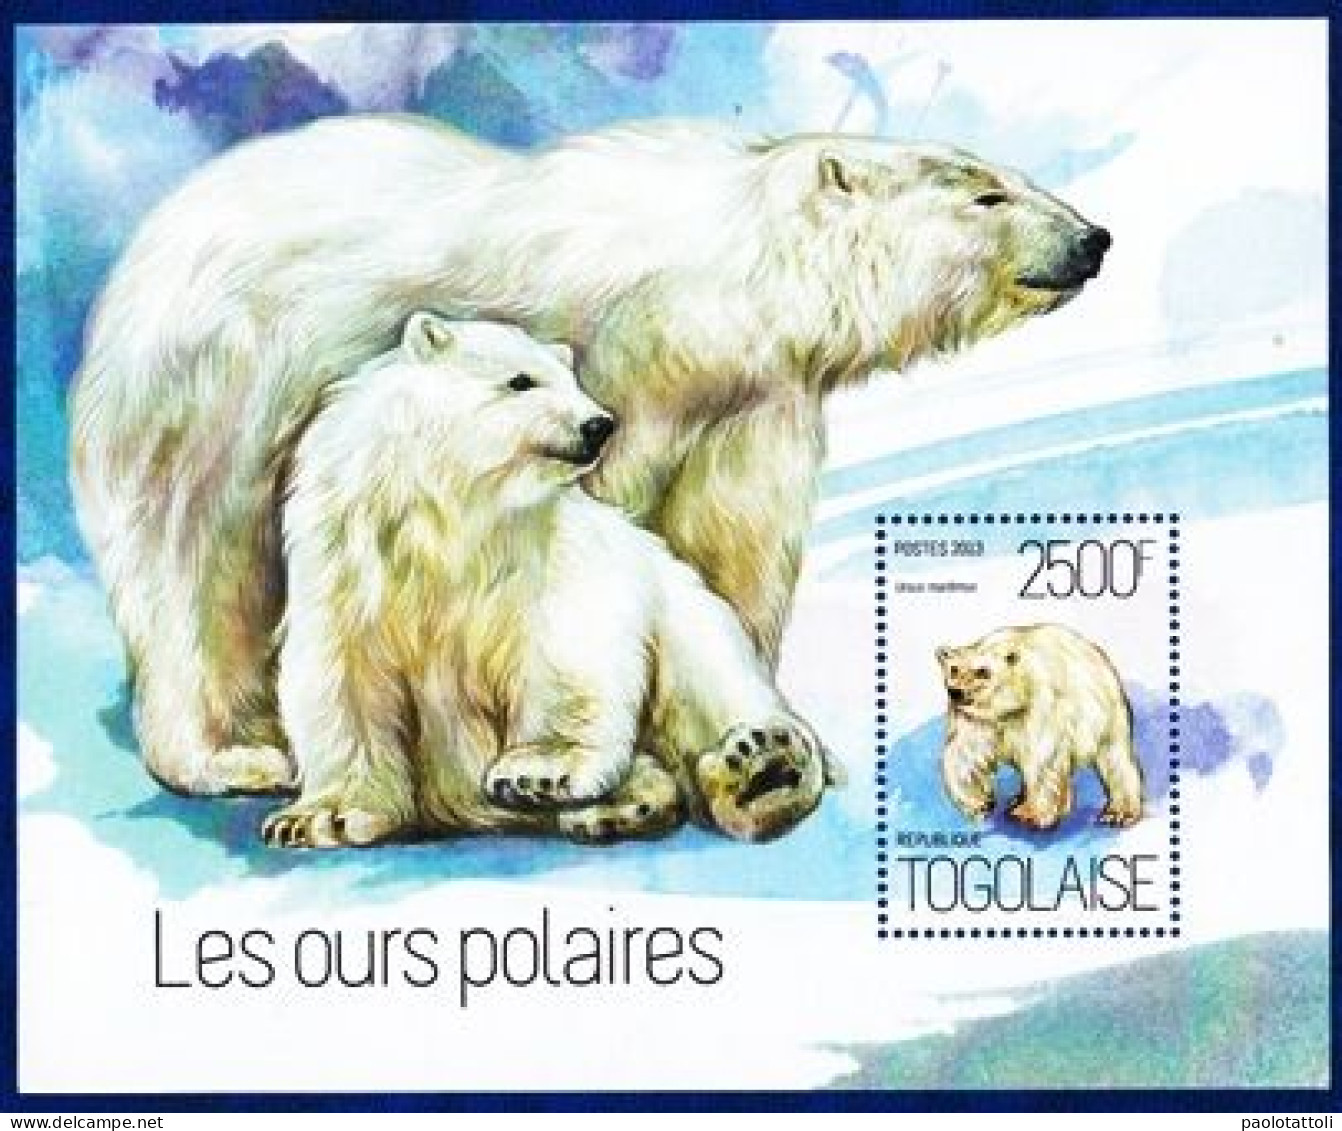 Togo, 2013- Les Ours Polaires-2500F- Block NewNH - Osos